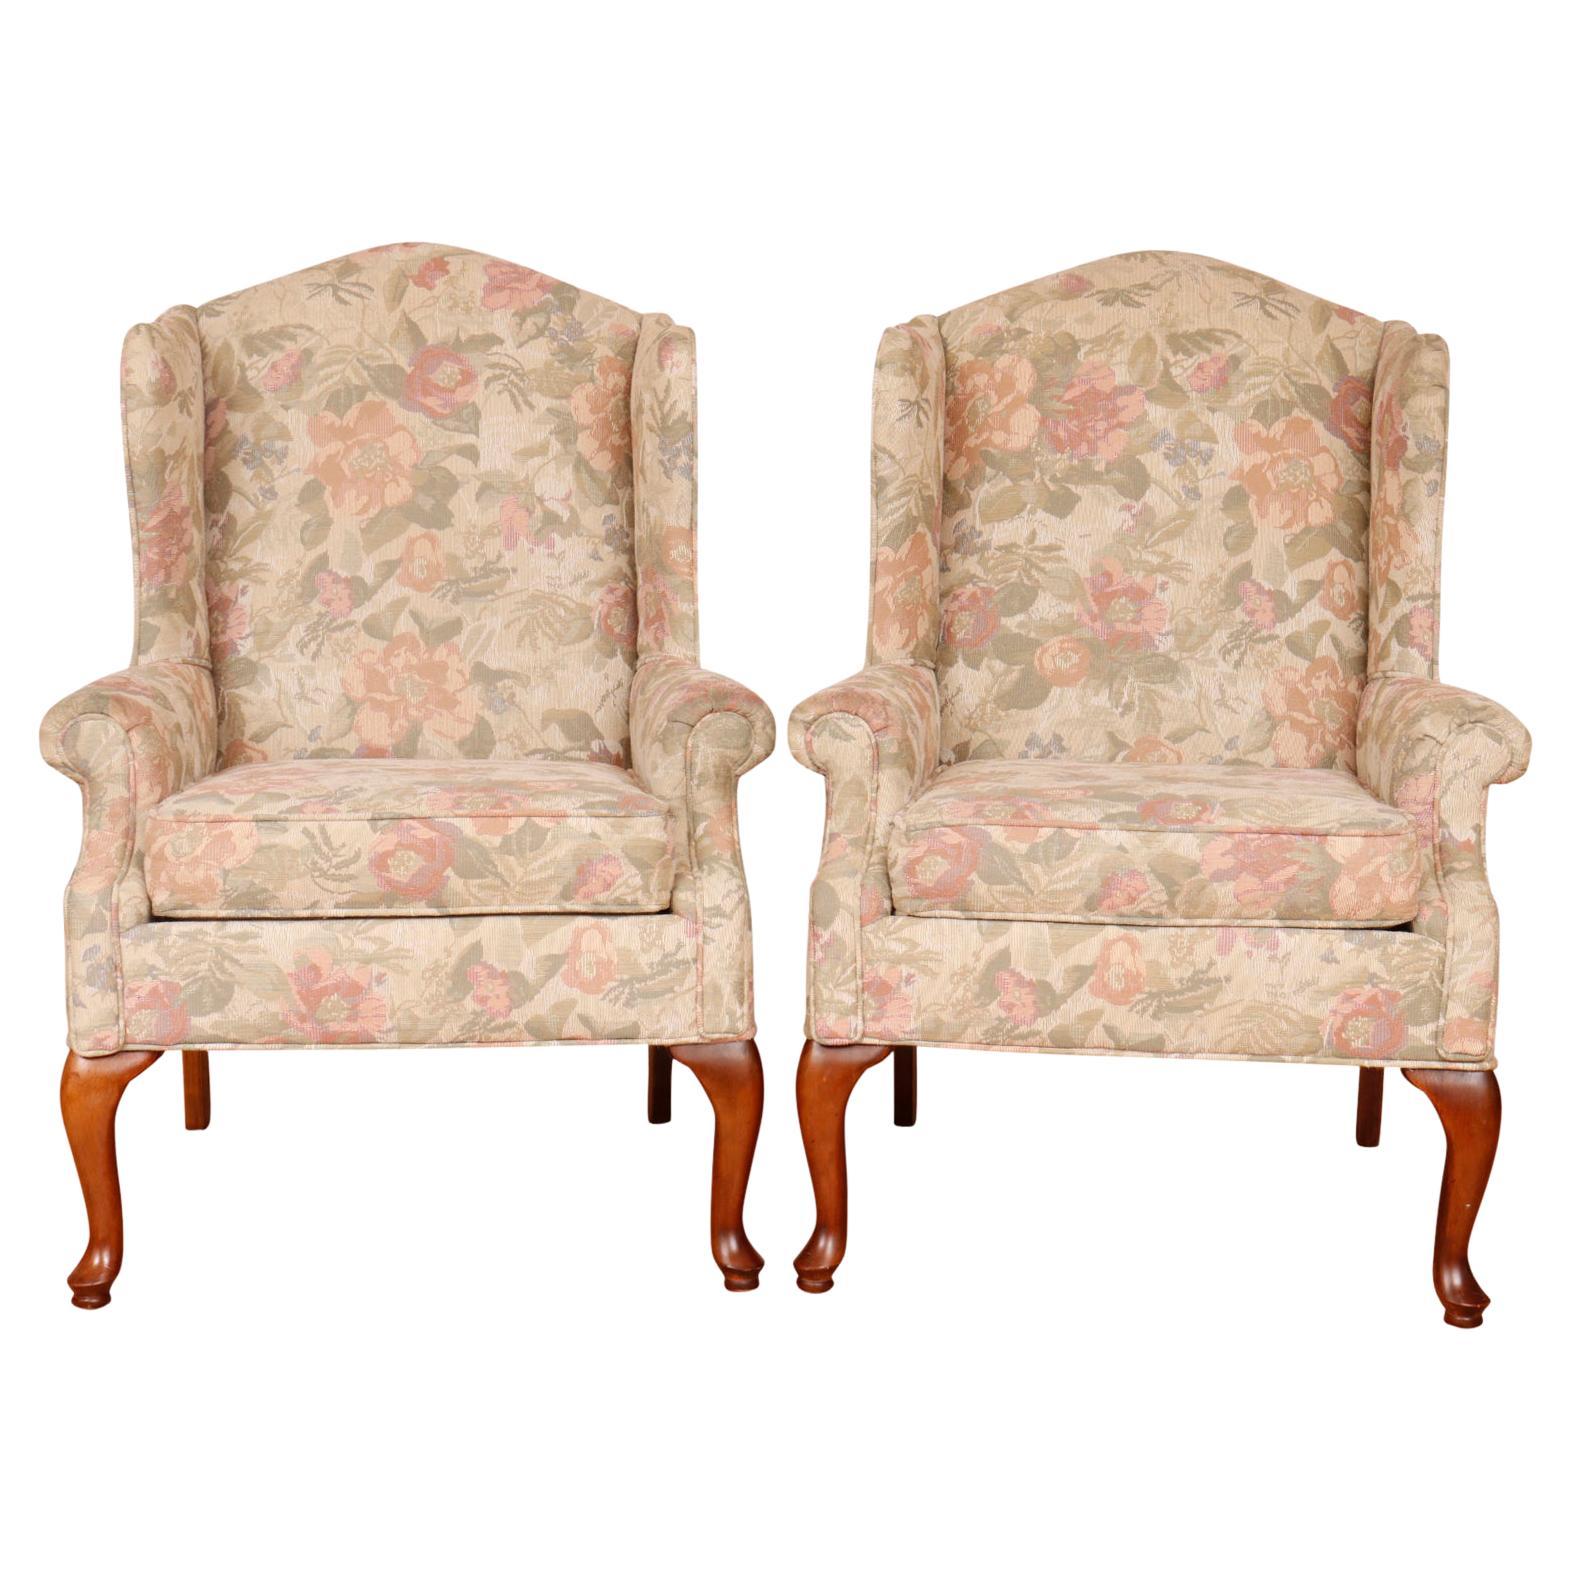 Queen Anne Floral Wingback Chairs by Rowe Furniture, a Pair